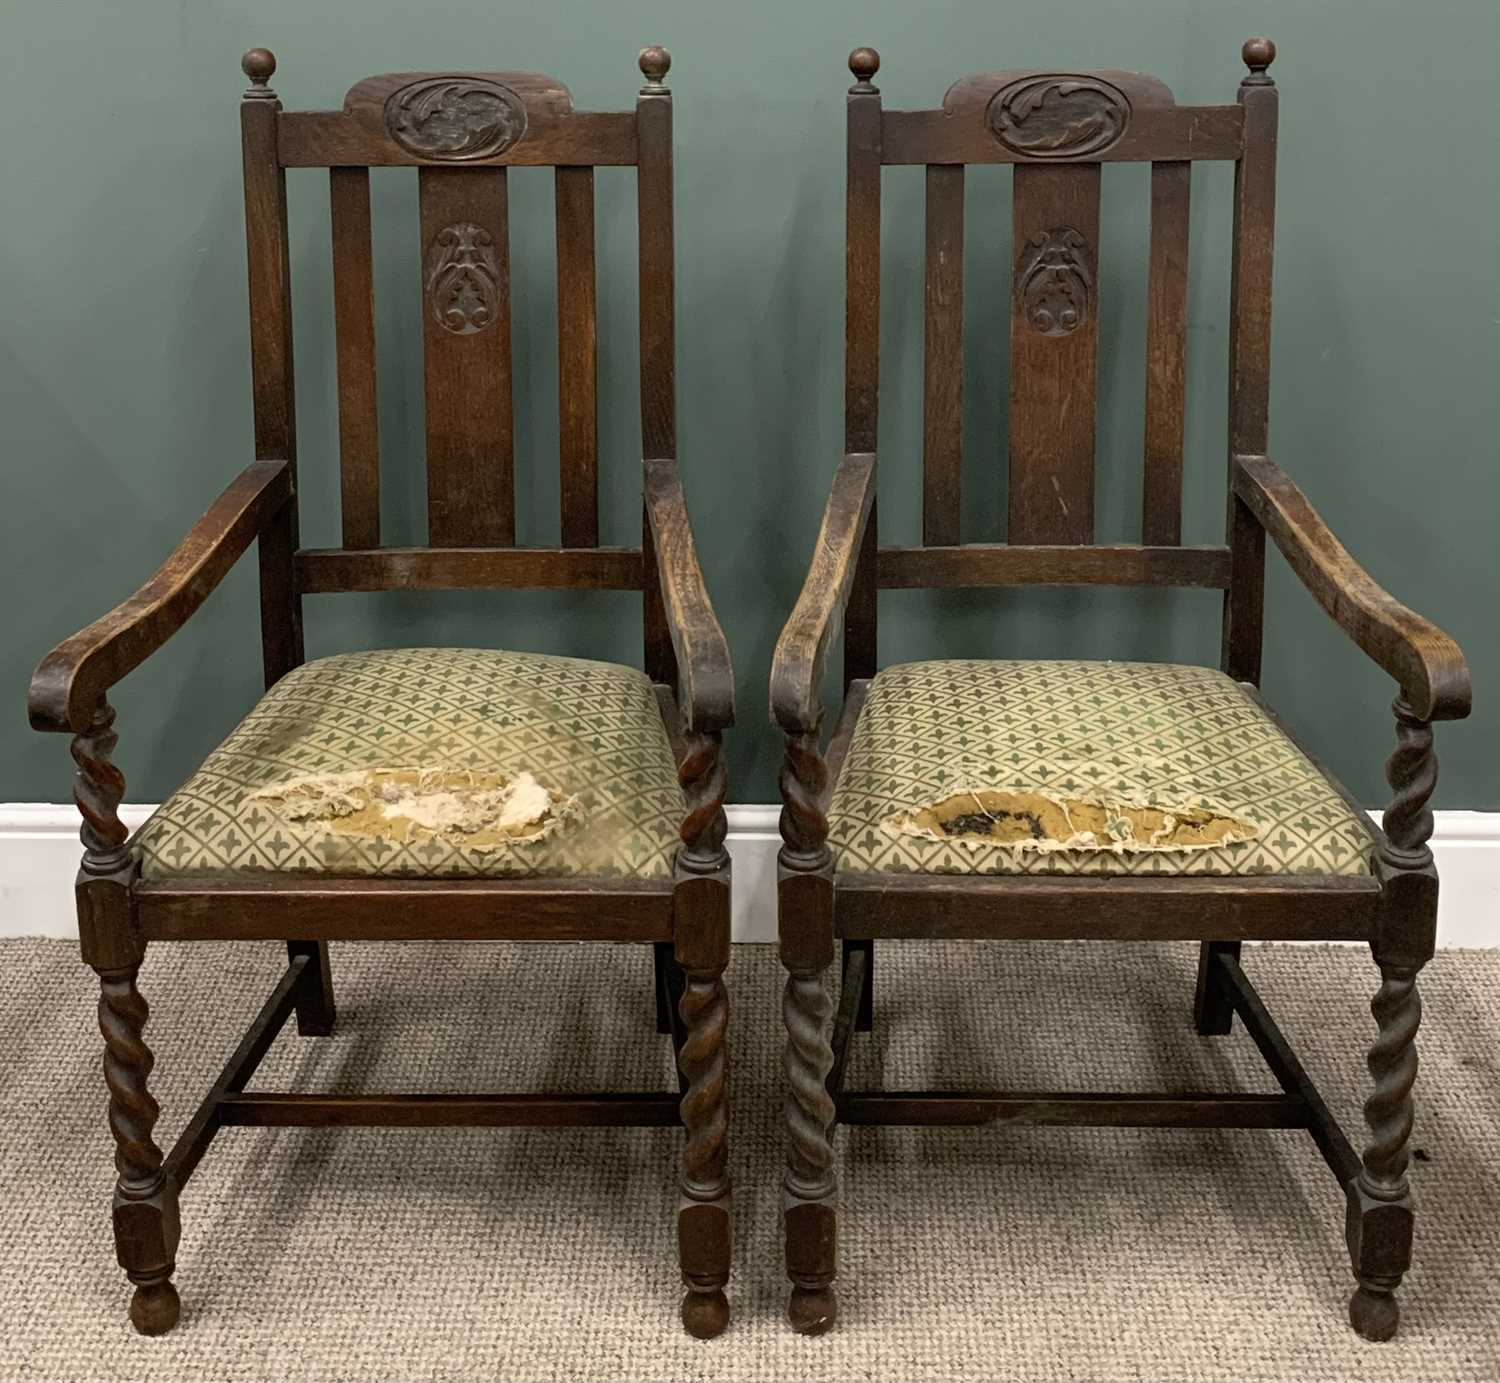 ASSORTED VINTAGE CHAIRS including pair of polished and twist carvers, two inlaid parlour chairs, two - Image 5 of 5